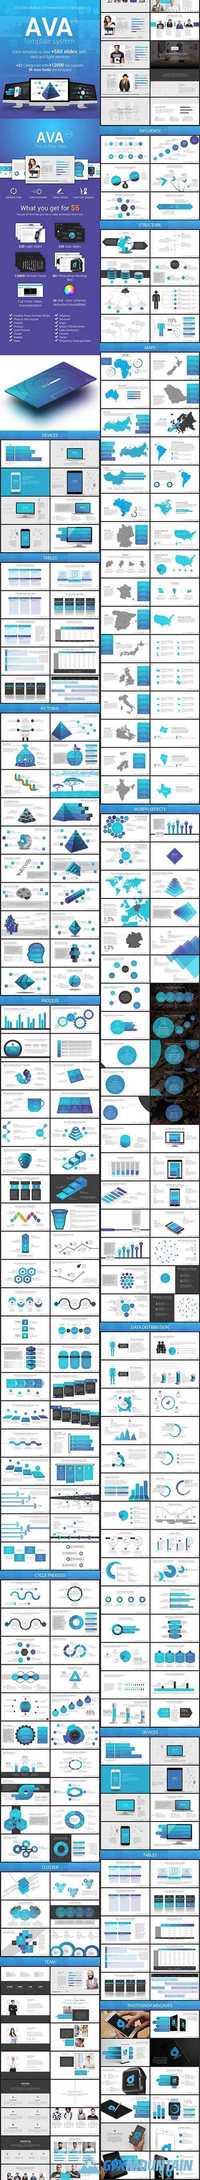 GraphicRiver - Ava Powerpoint Template System 17962691